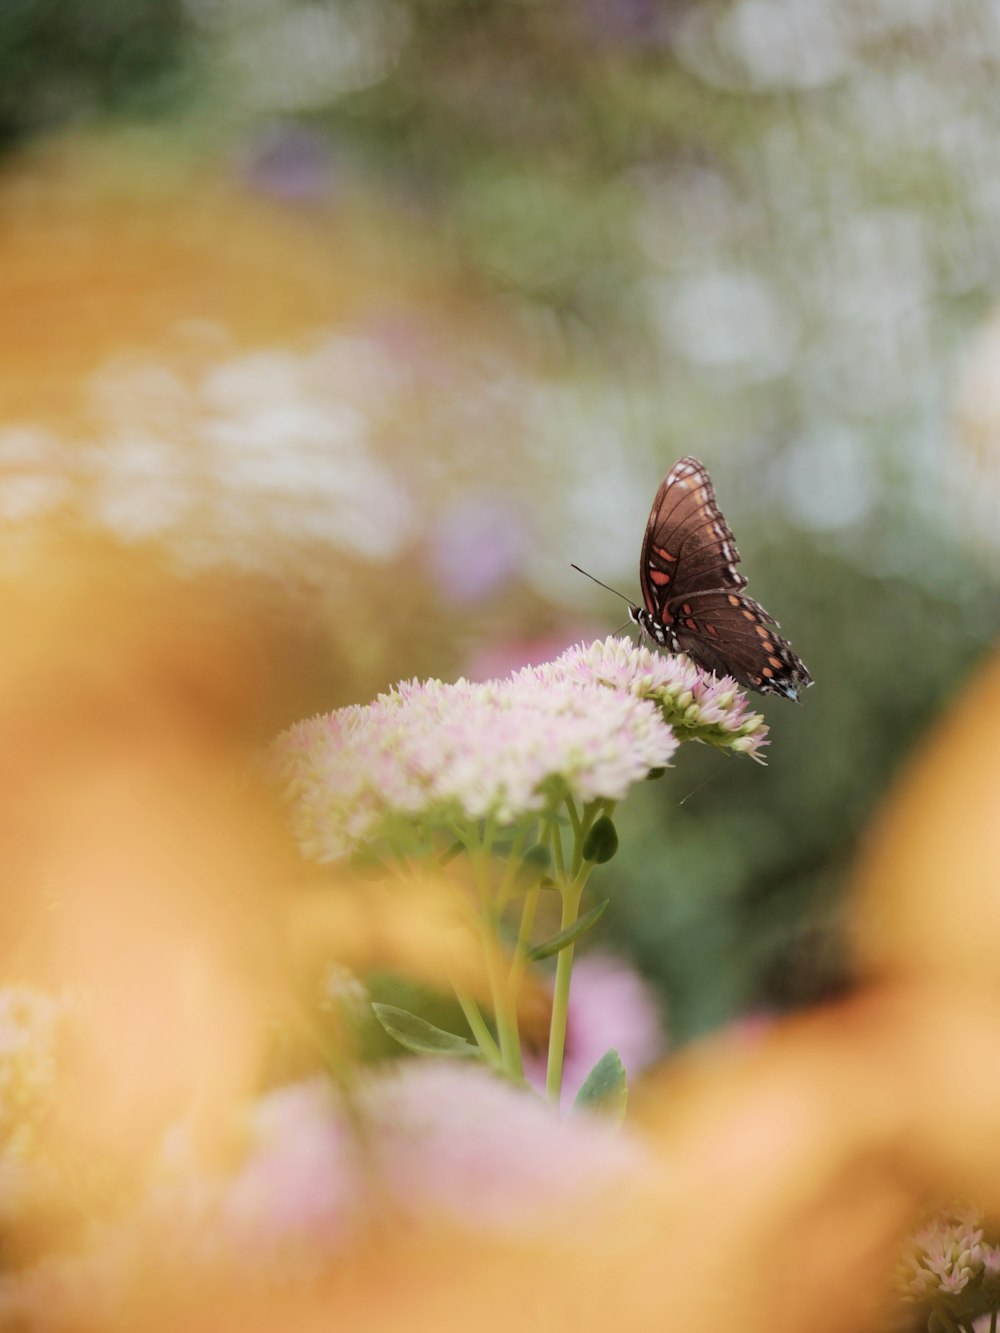 brown butterfly perched on white flower in close up photography during daytime